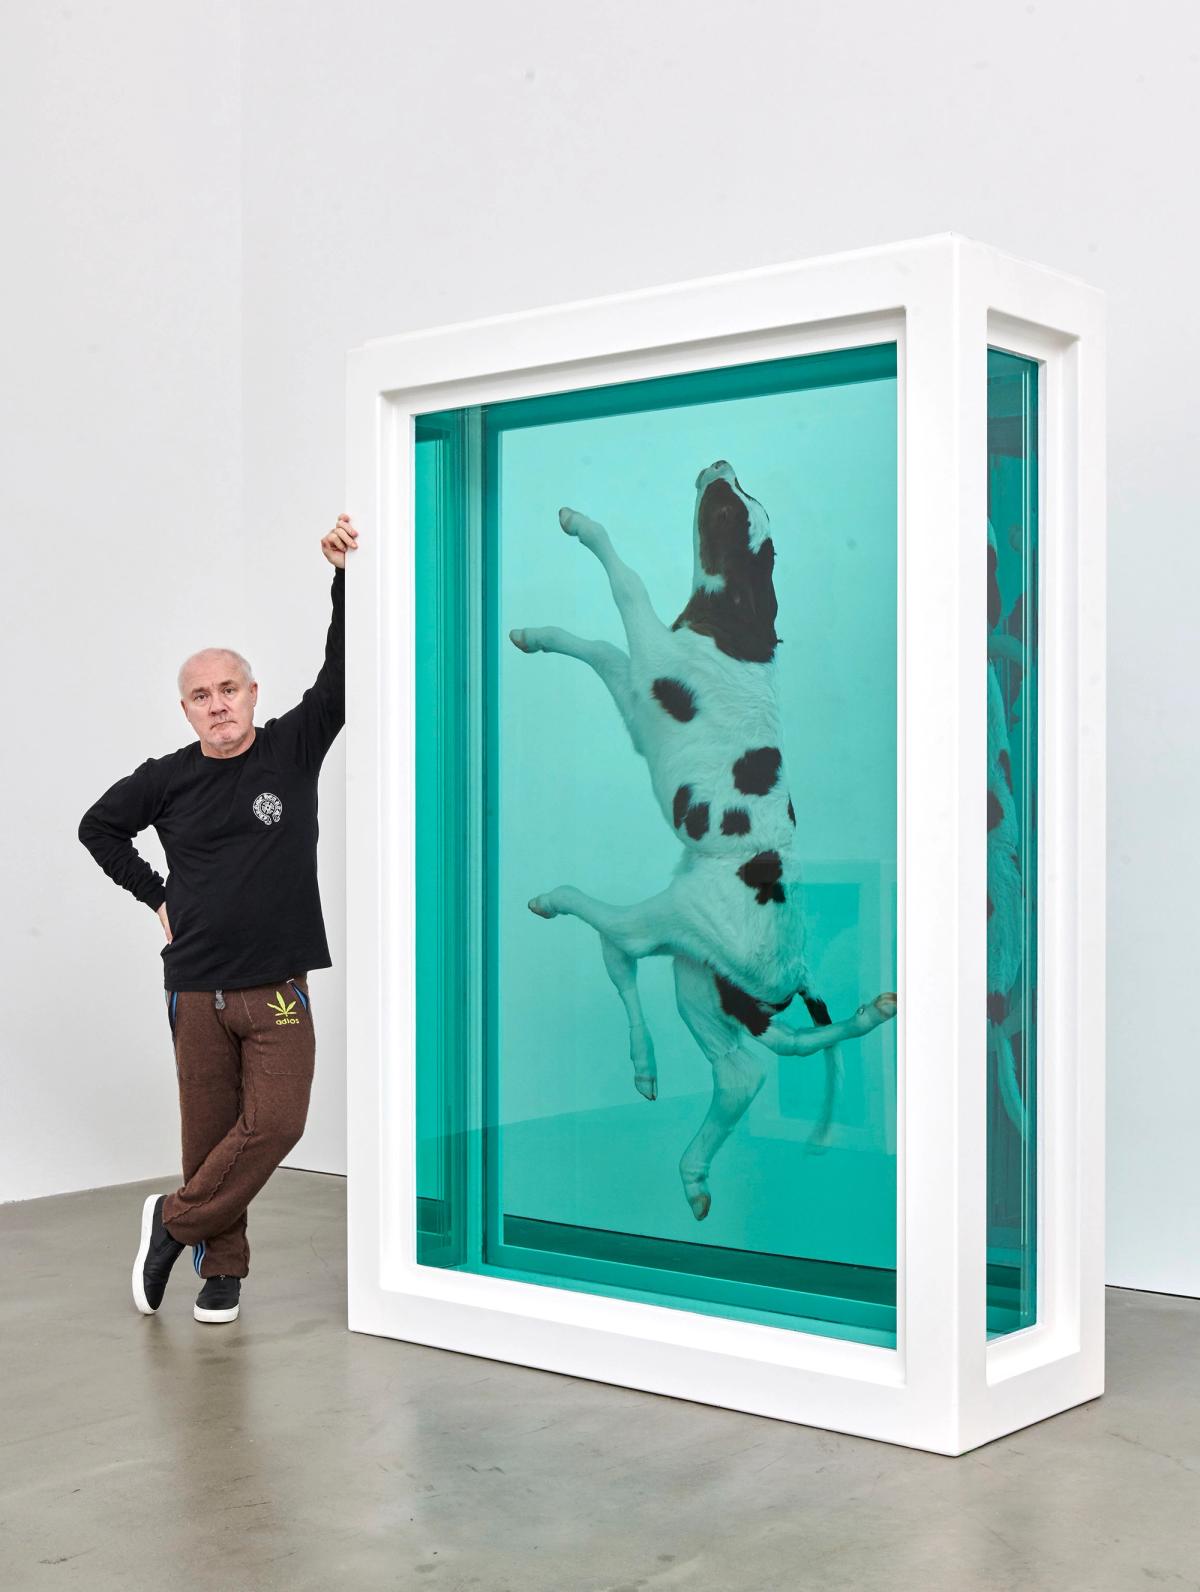 Damien Hirst photographed by Prudence Cuming Associates Ltd.

© Damien Hirst and Science Ltd. All rights reserved, DACS/Artimage 2023